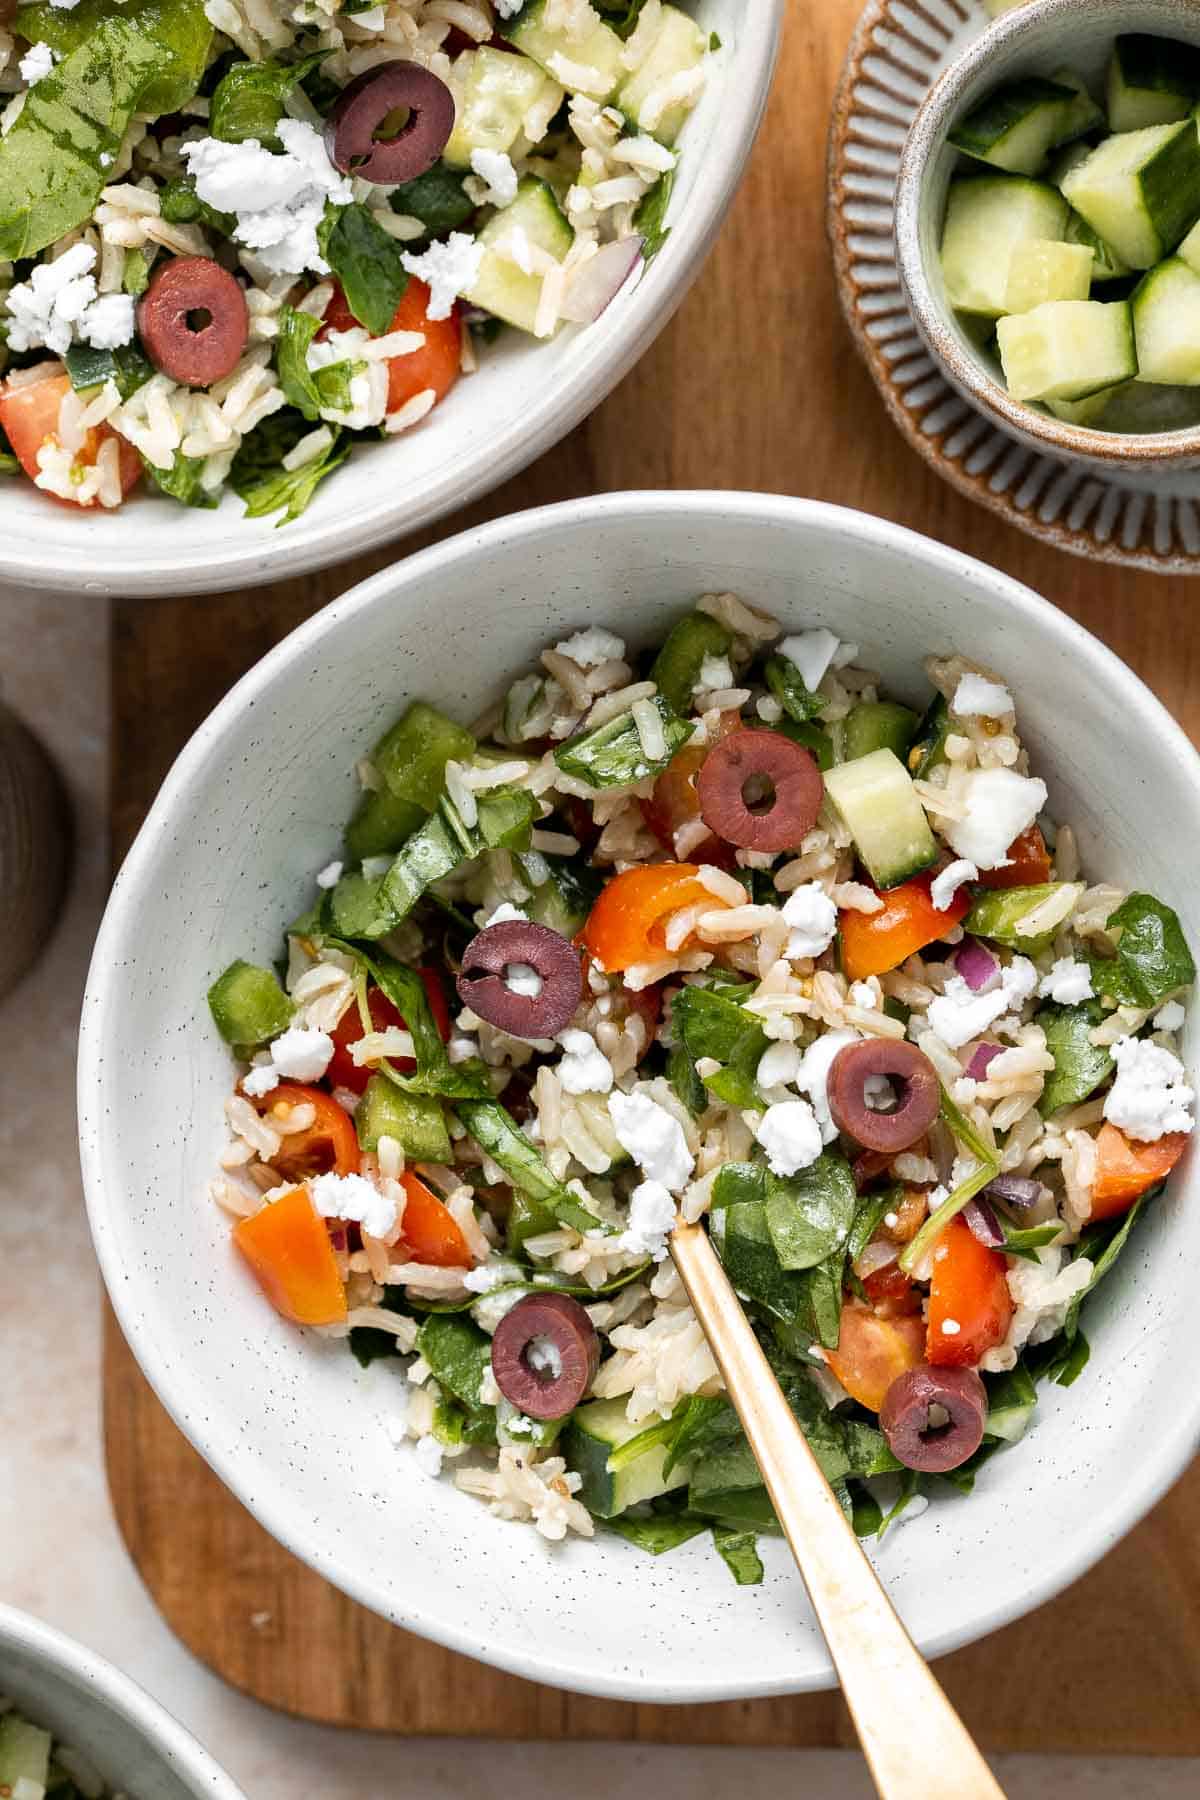 Mediterranean Brown Rice Salad loaded with veggies and tossed in a Greek dressing is filling, healthy, nutritious, gluten-free, and easy to make. | aheadofthyme.com